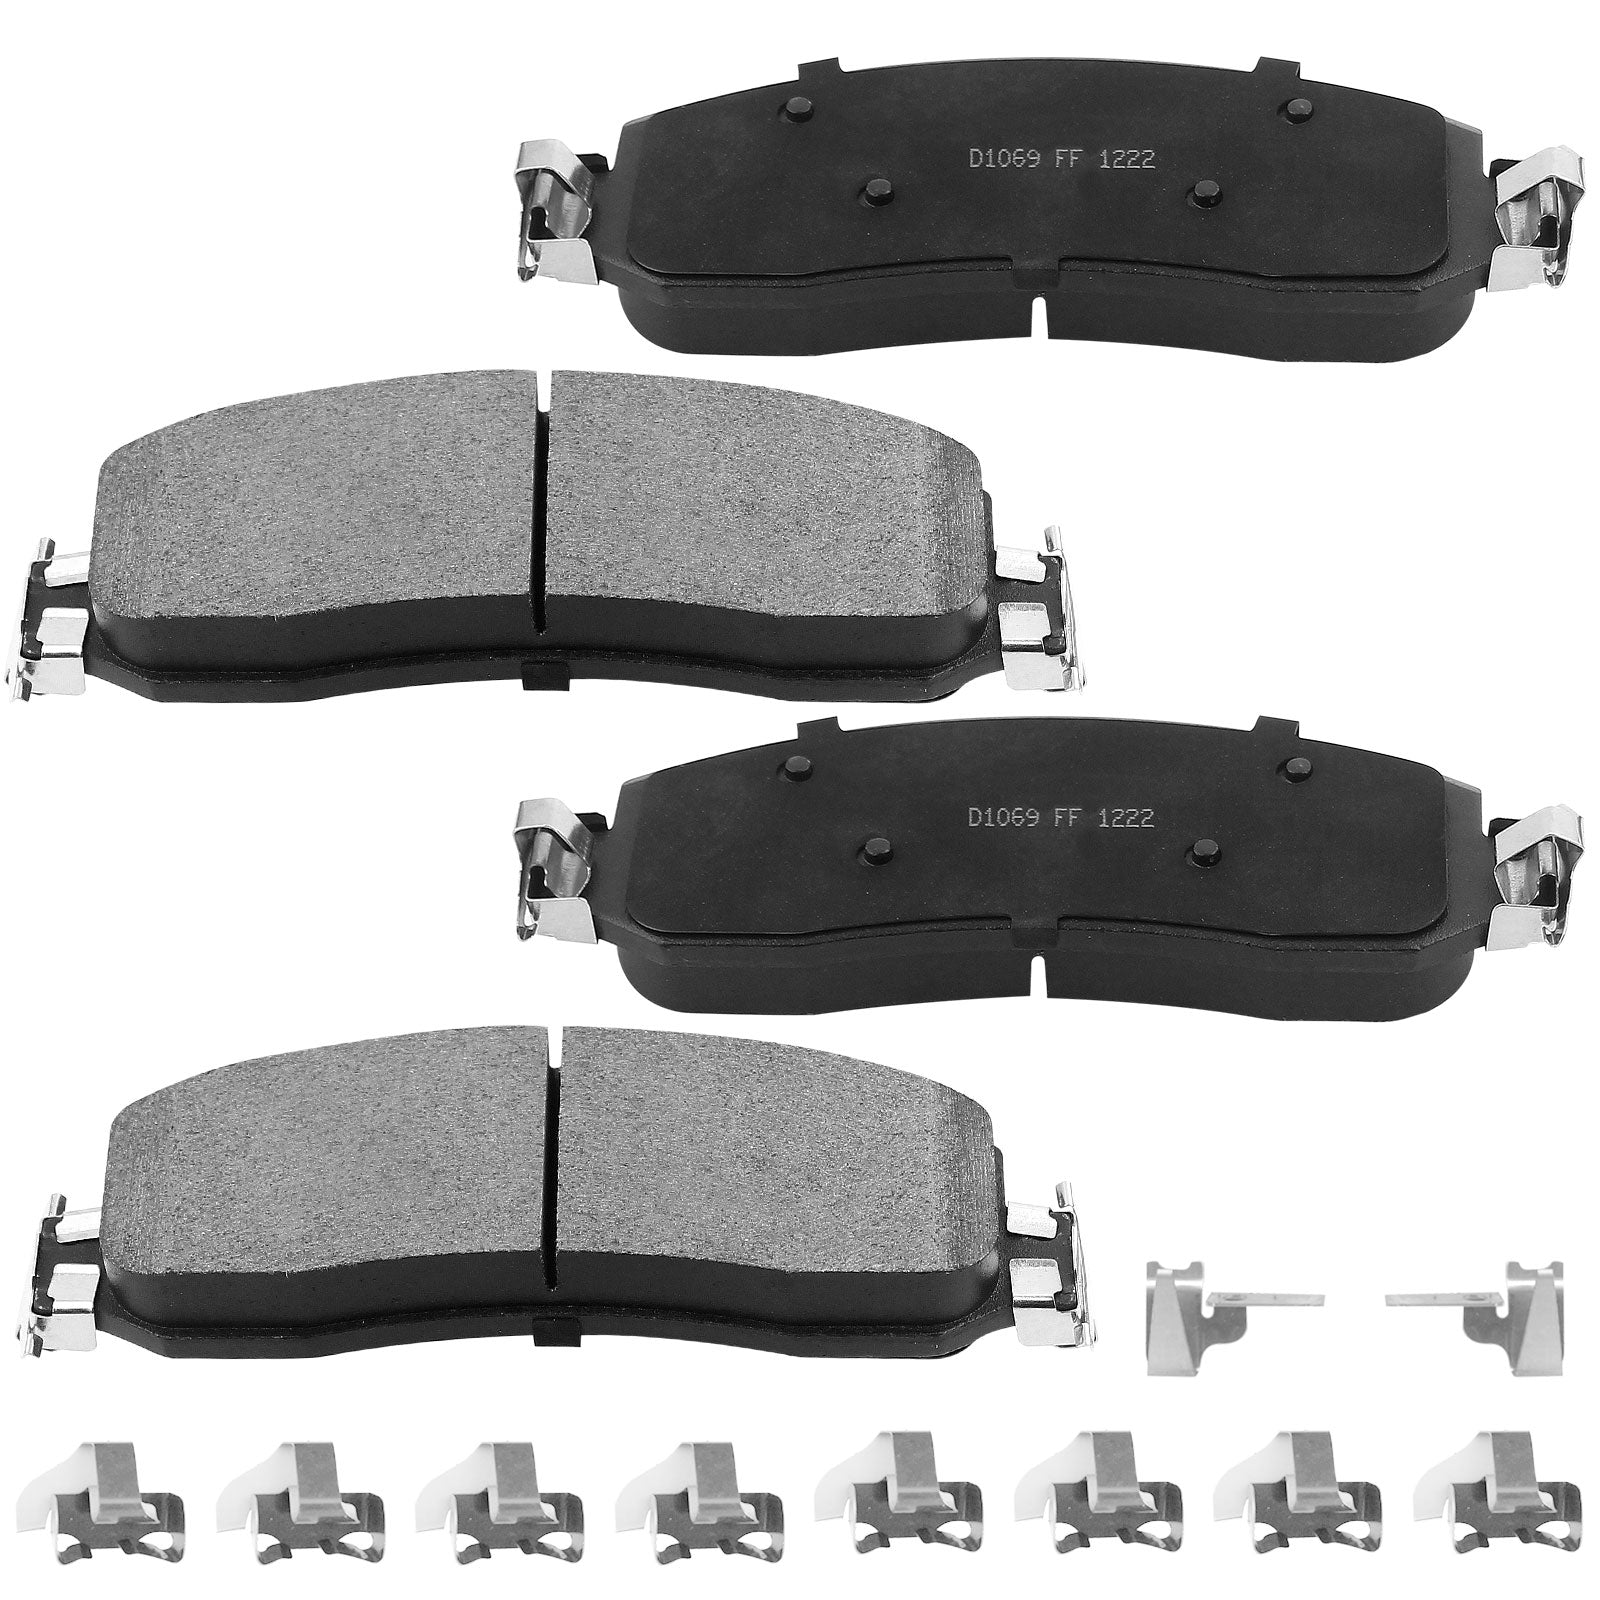 Front Ceramic Brake Pads w/Hardware Kits Fits for Ford F-250 Super Duty 2005-2011 (All Models), Ford F-350 Super Duty 2005-2012 (All Models)-Low Dust Brake Pad-4 Pack MotorbyMotor